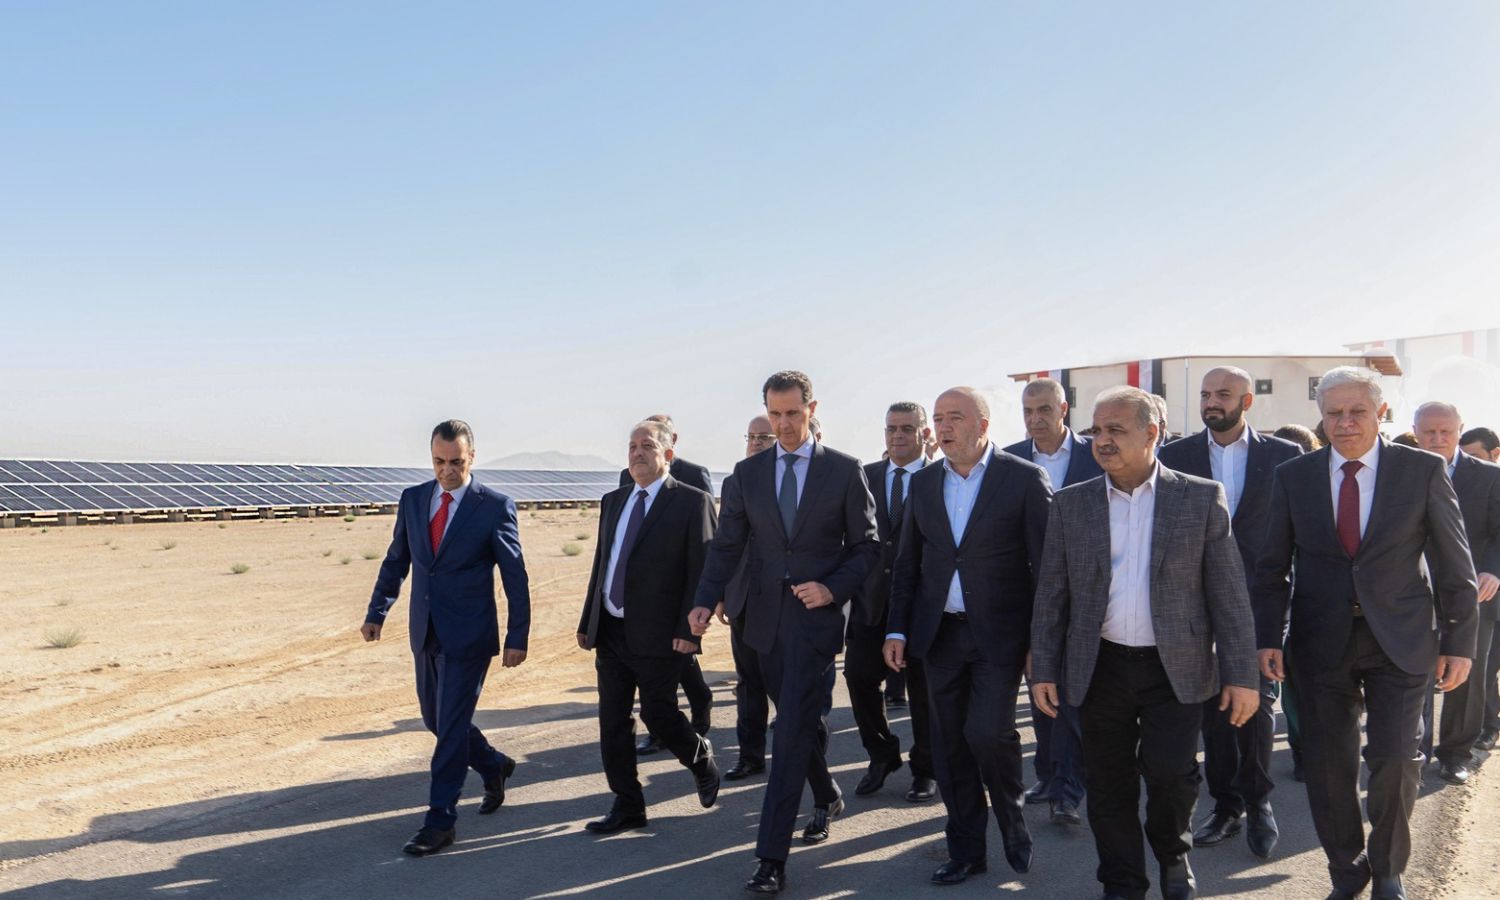 The head of the Syrian regime Bashar al-Assad accompanied by businessman Badih Aldroubi during the launch of the photovoltaic energy project in the industrial city of Adra in Damascus countryside - September 2022 (Presidency of the Republic account on Facebook)